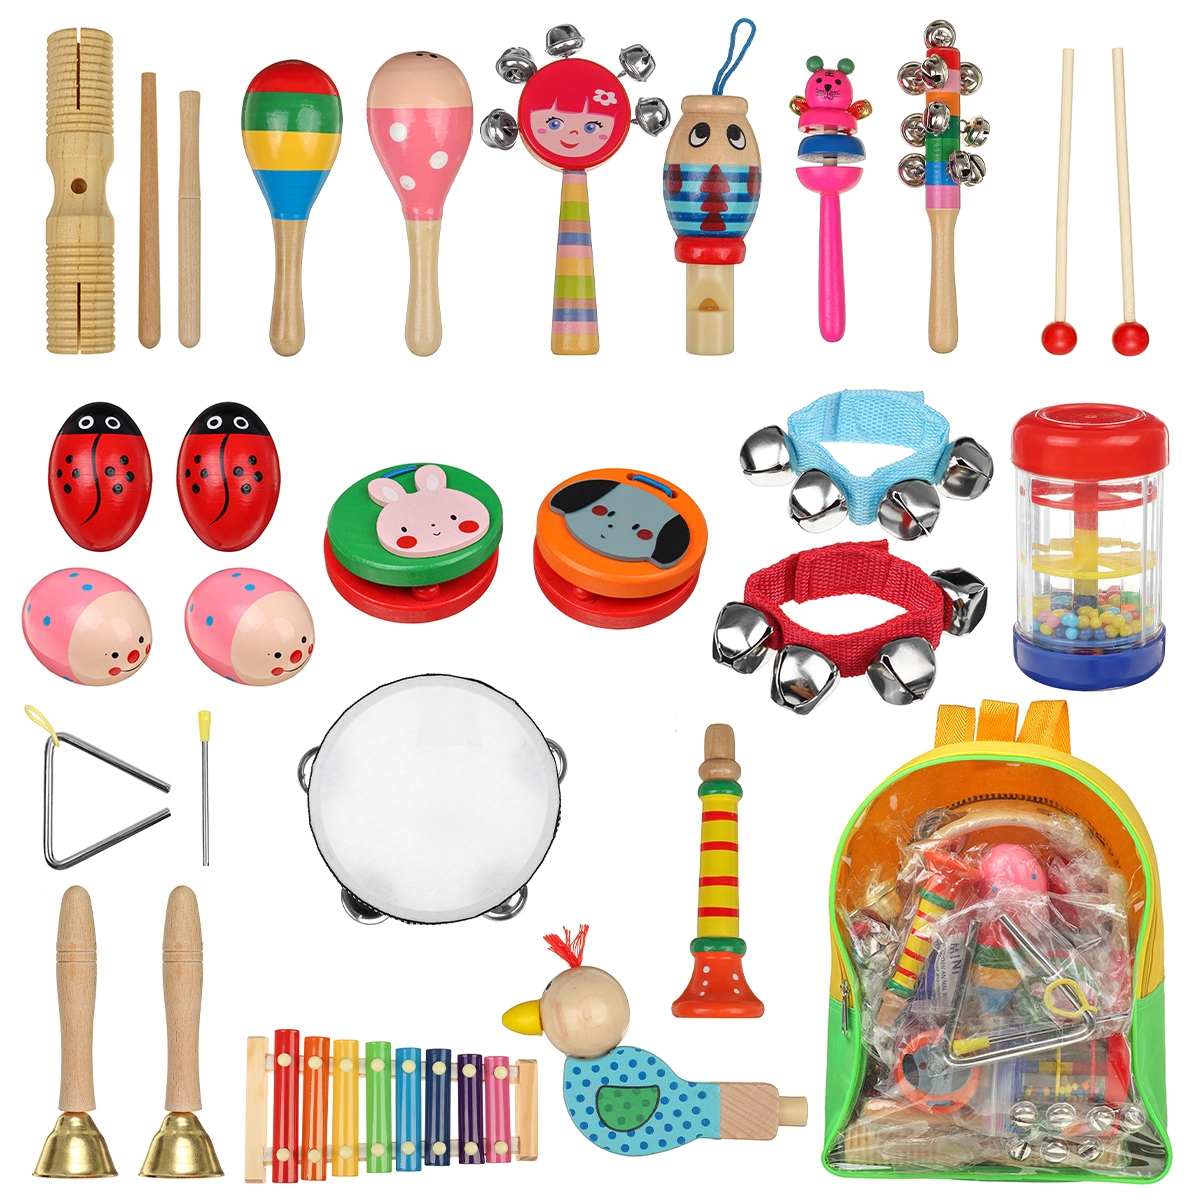 24PCS Wooden Kids Musical Instruments Baby Toddlers Early Education Set Rattles Toys